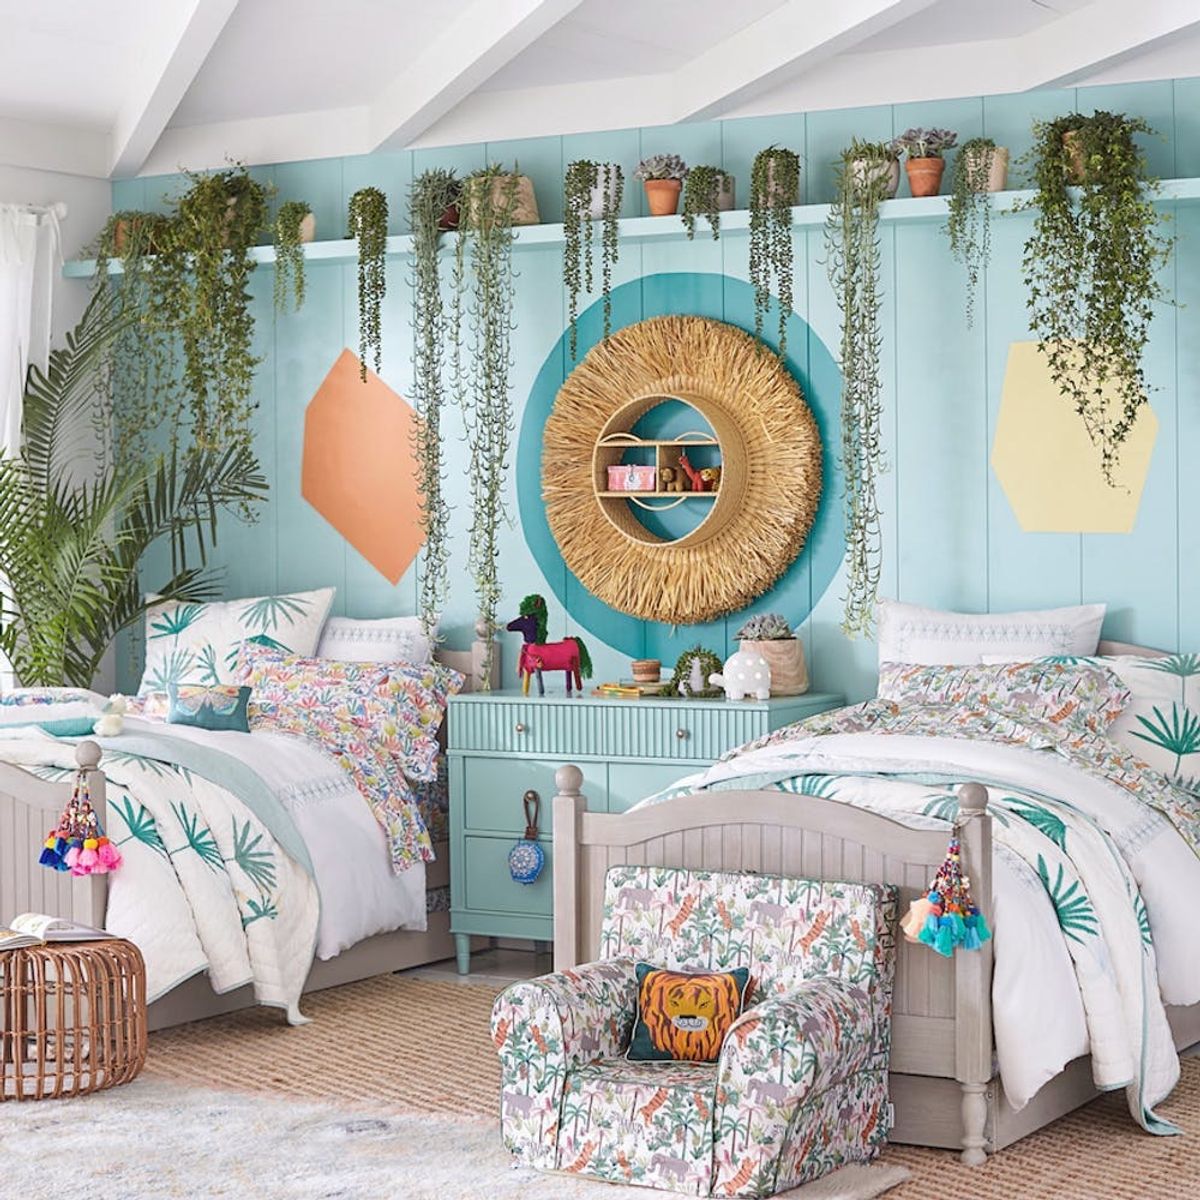 Justina Blakeney’s New Collab With Pottery Barn Kids Is What Jungalow Dreams Are Made Of